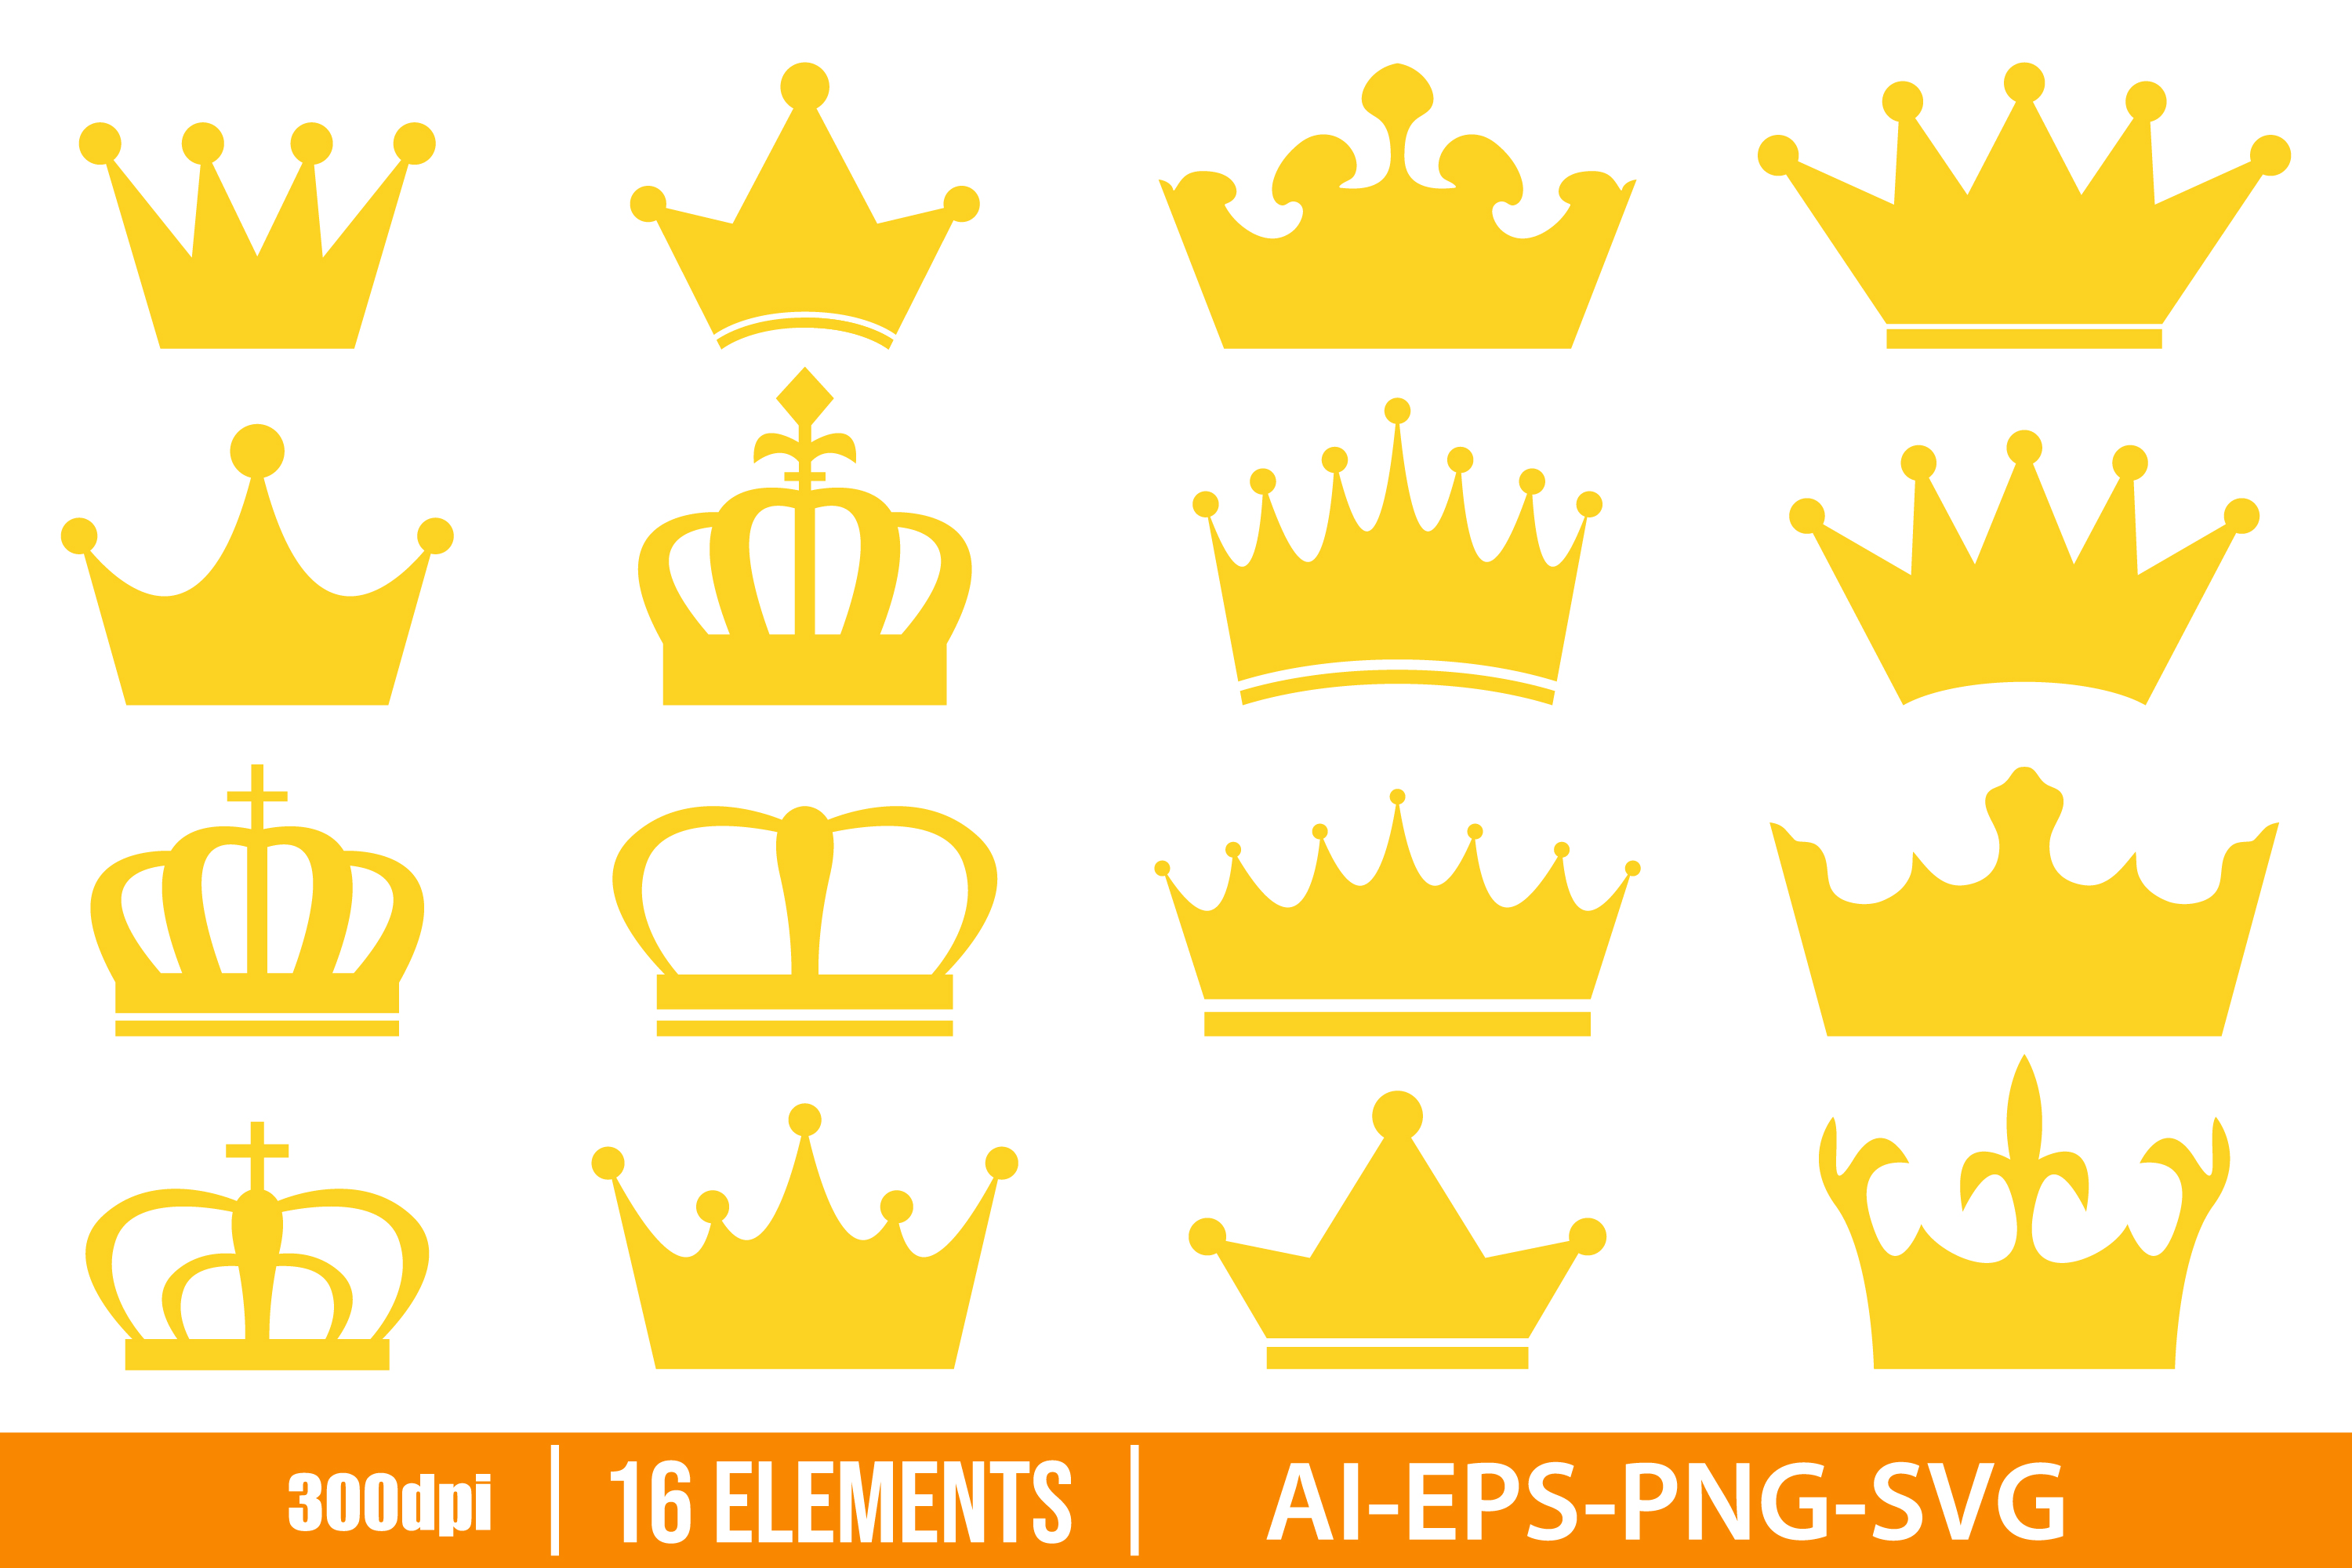 King Queen Crown 300dpi Graphic Royal Crown Printable 